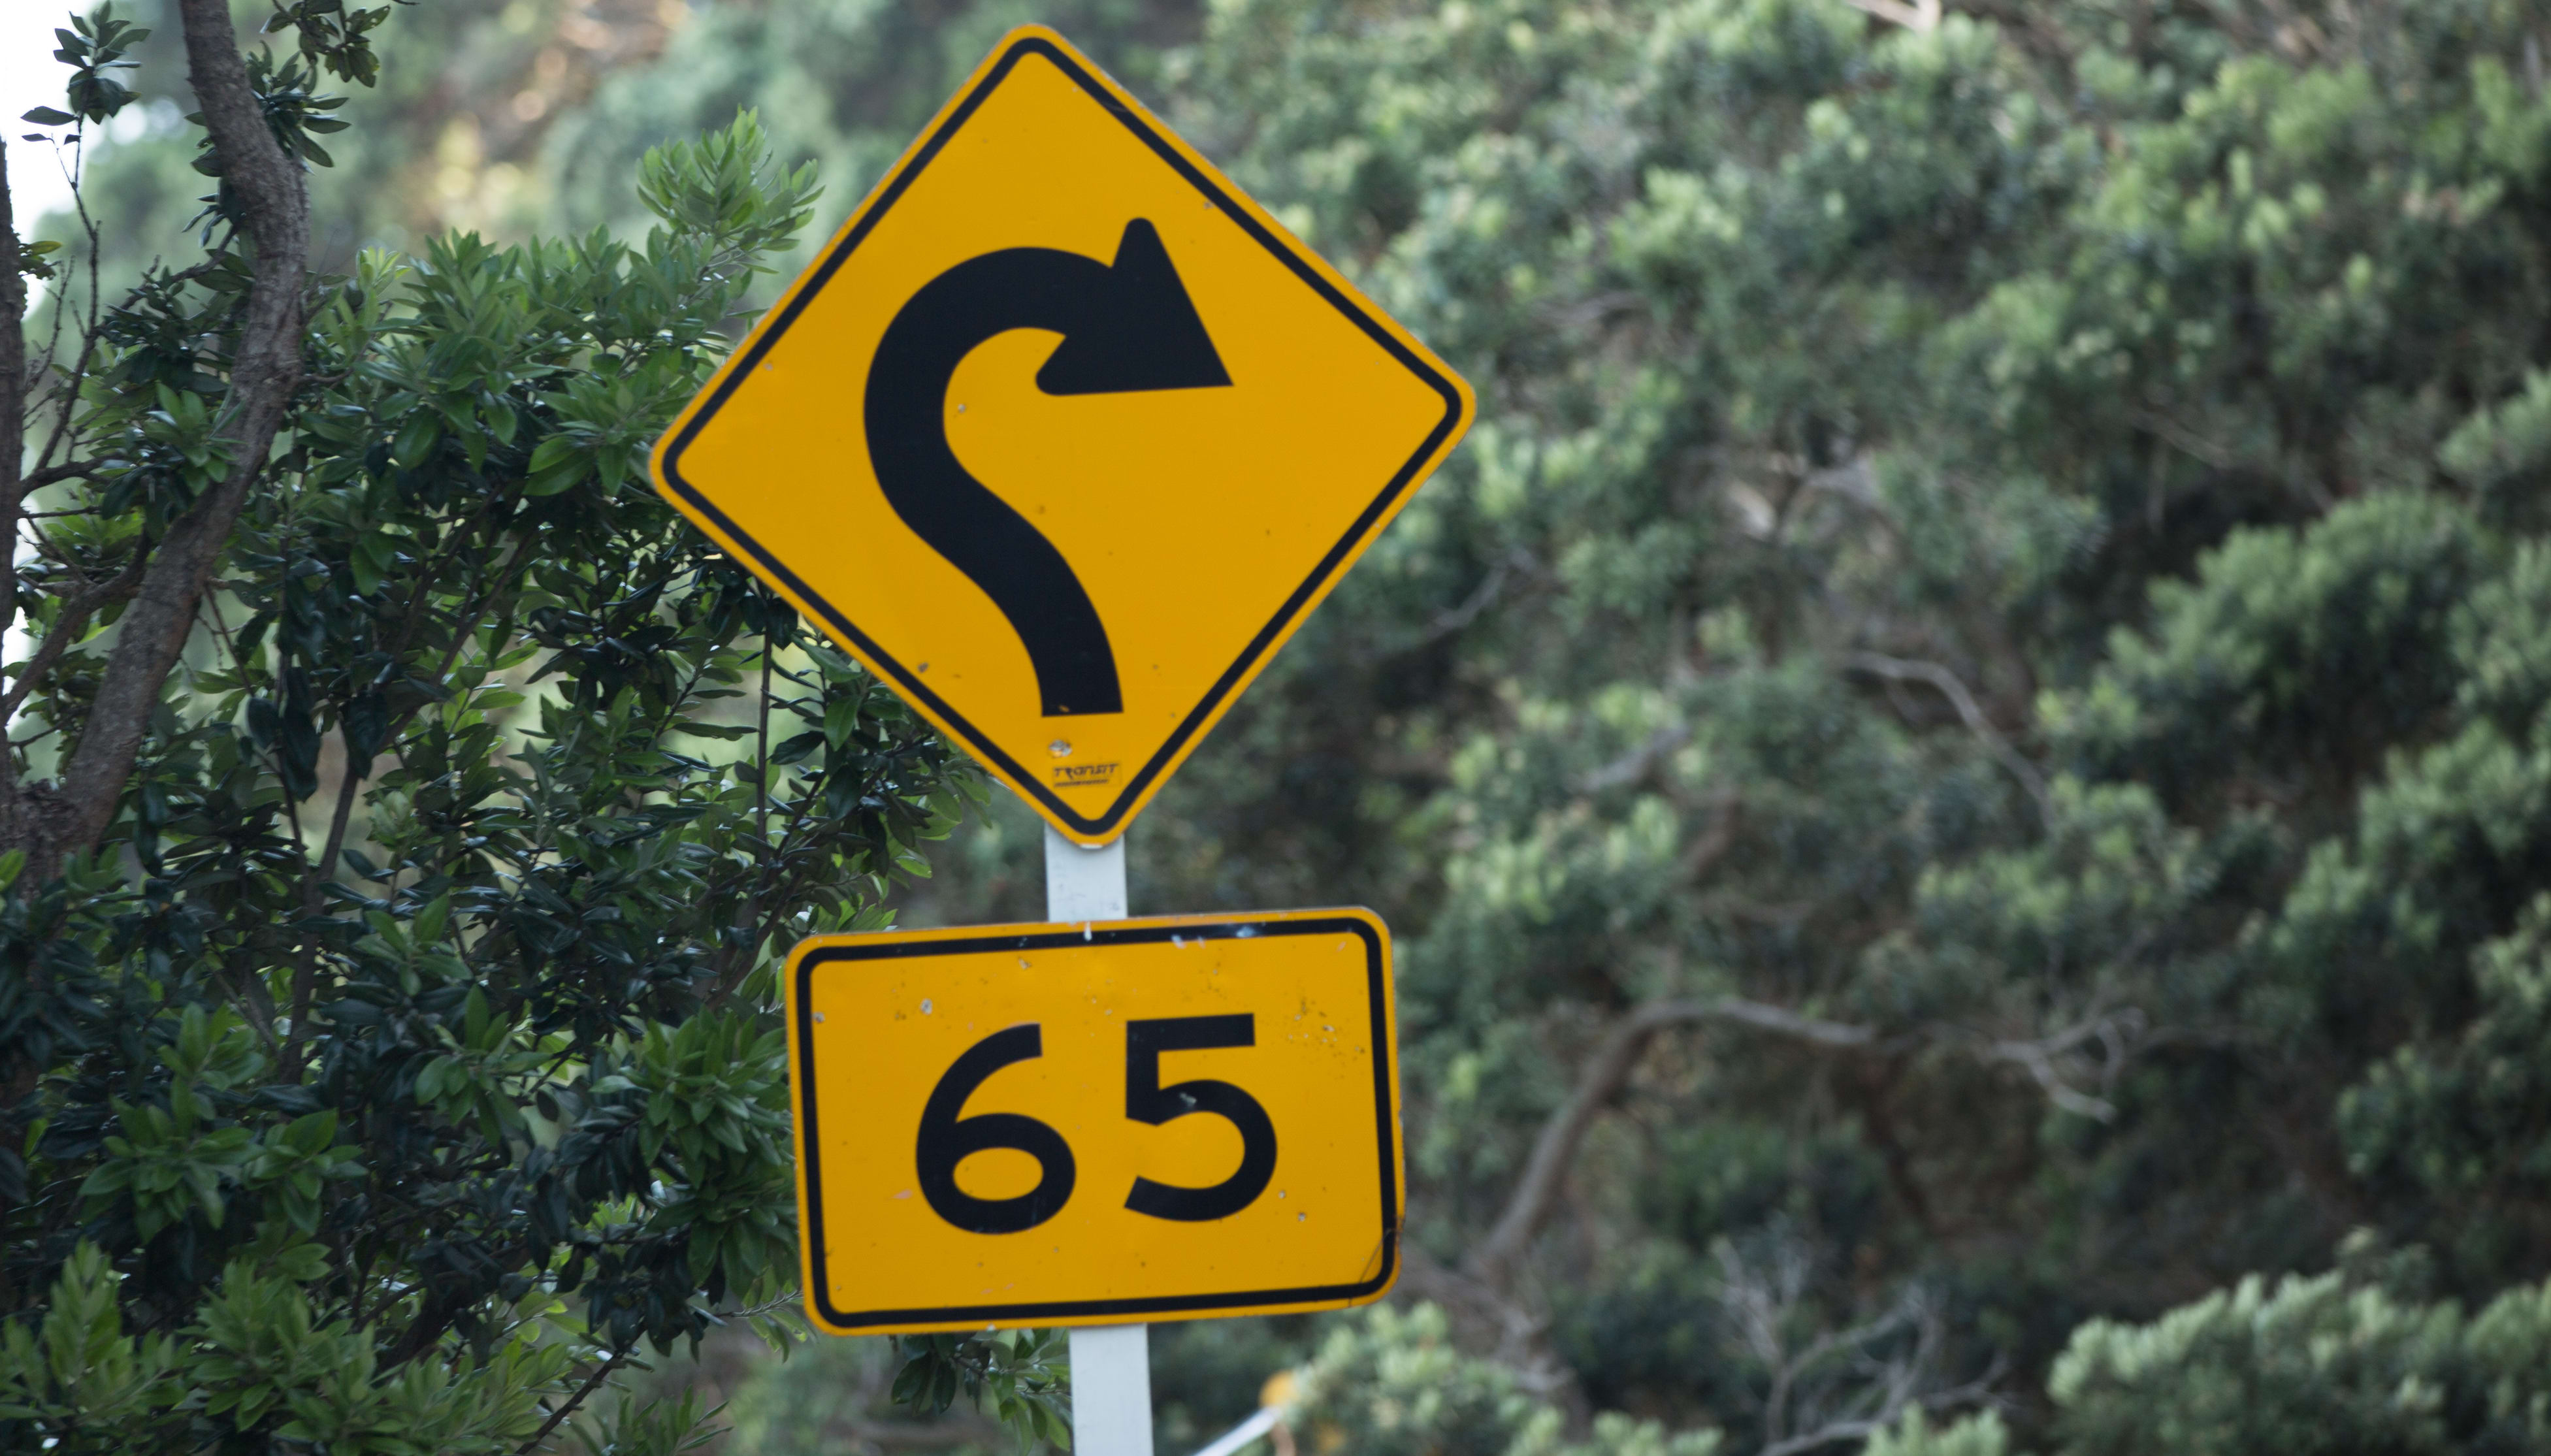 A road sign indicating a 65km speed around a tight corner on a rural road in the Coromandel.